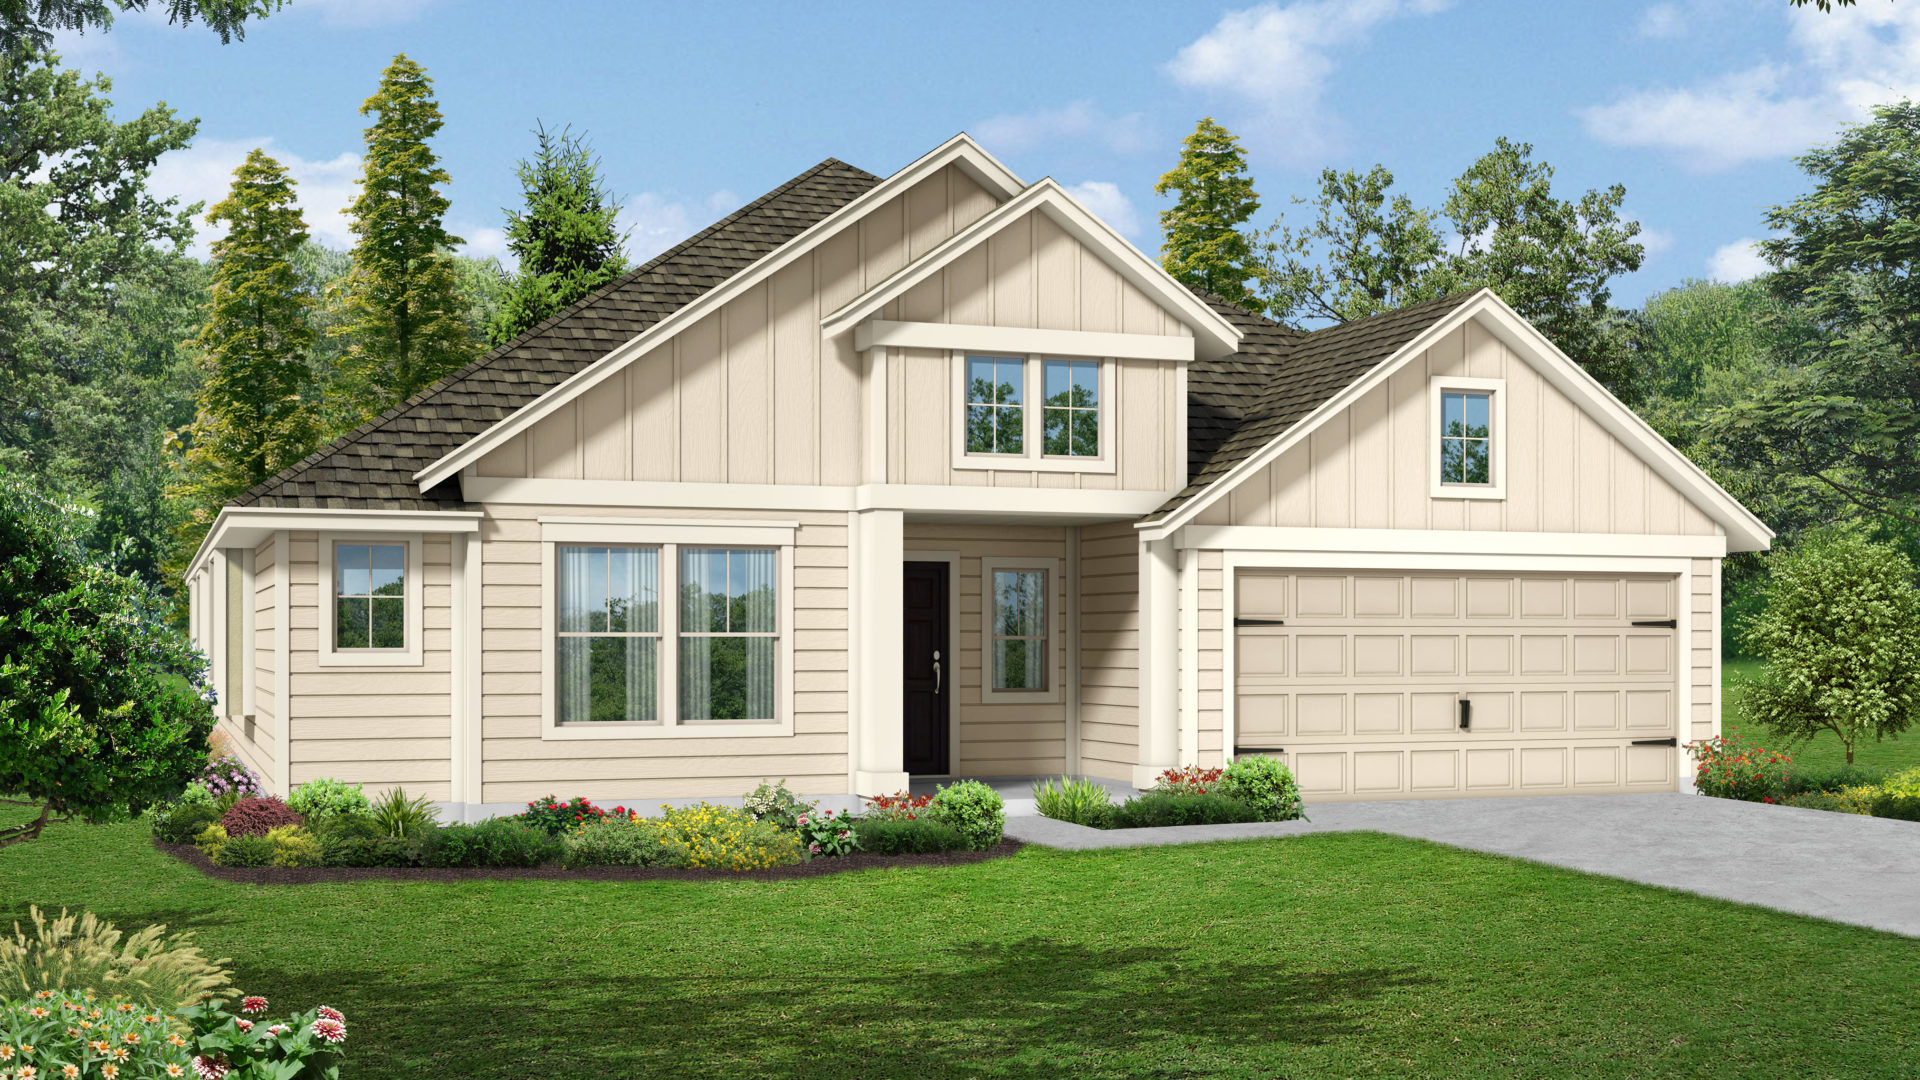 The Maybeck I Elevation E Orchard Ridge New Homes in Liberty Hill